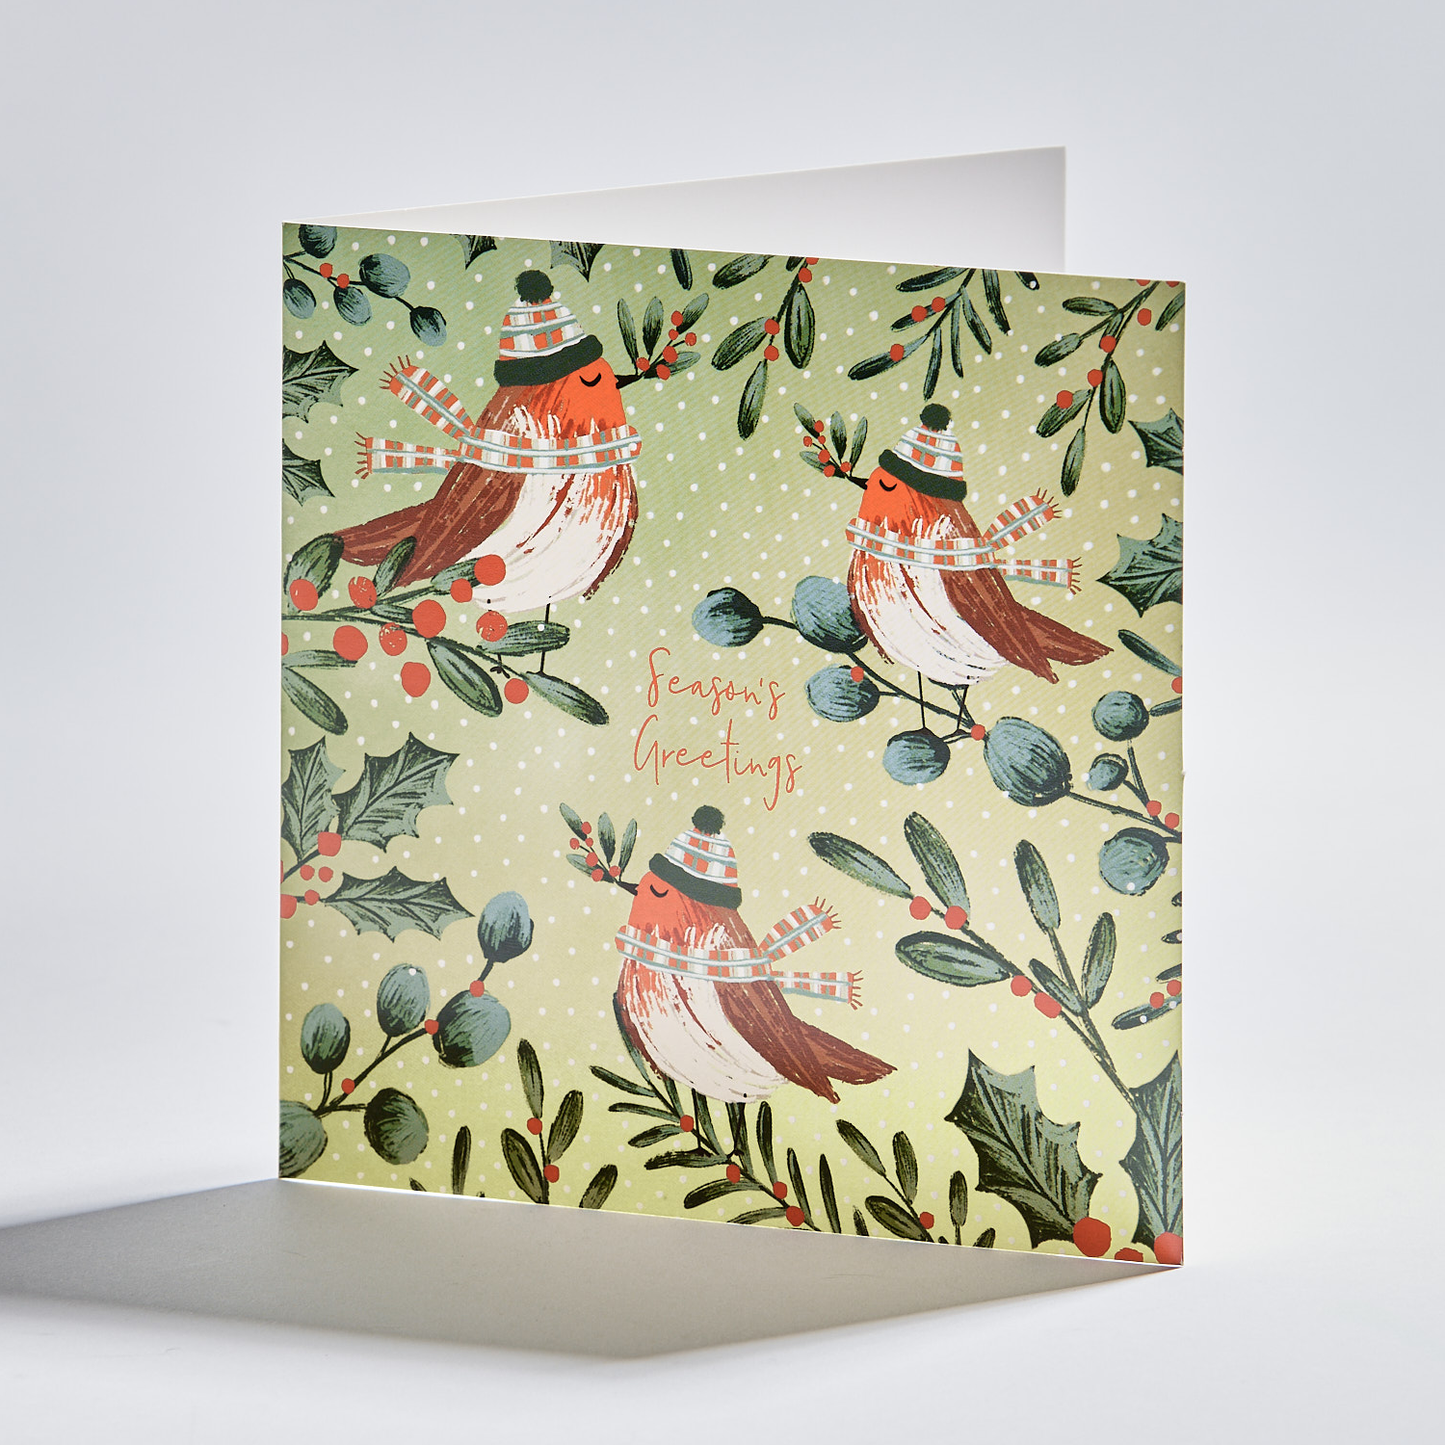 Standing christmas card which depicts three robins. Text reads 'season's greetings'